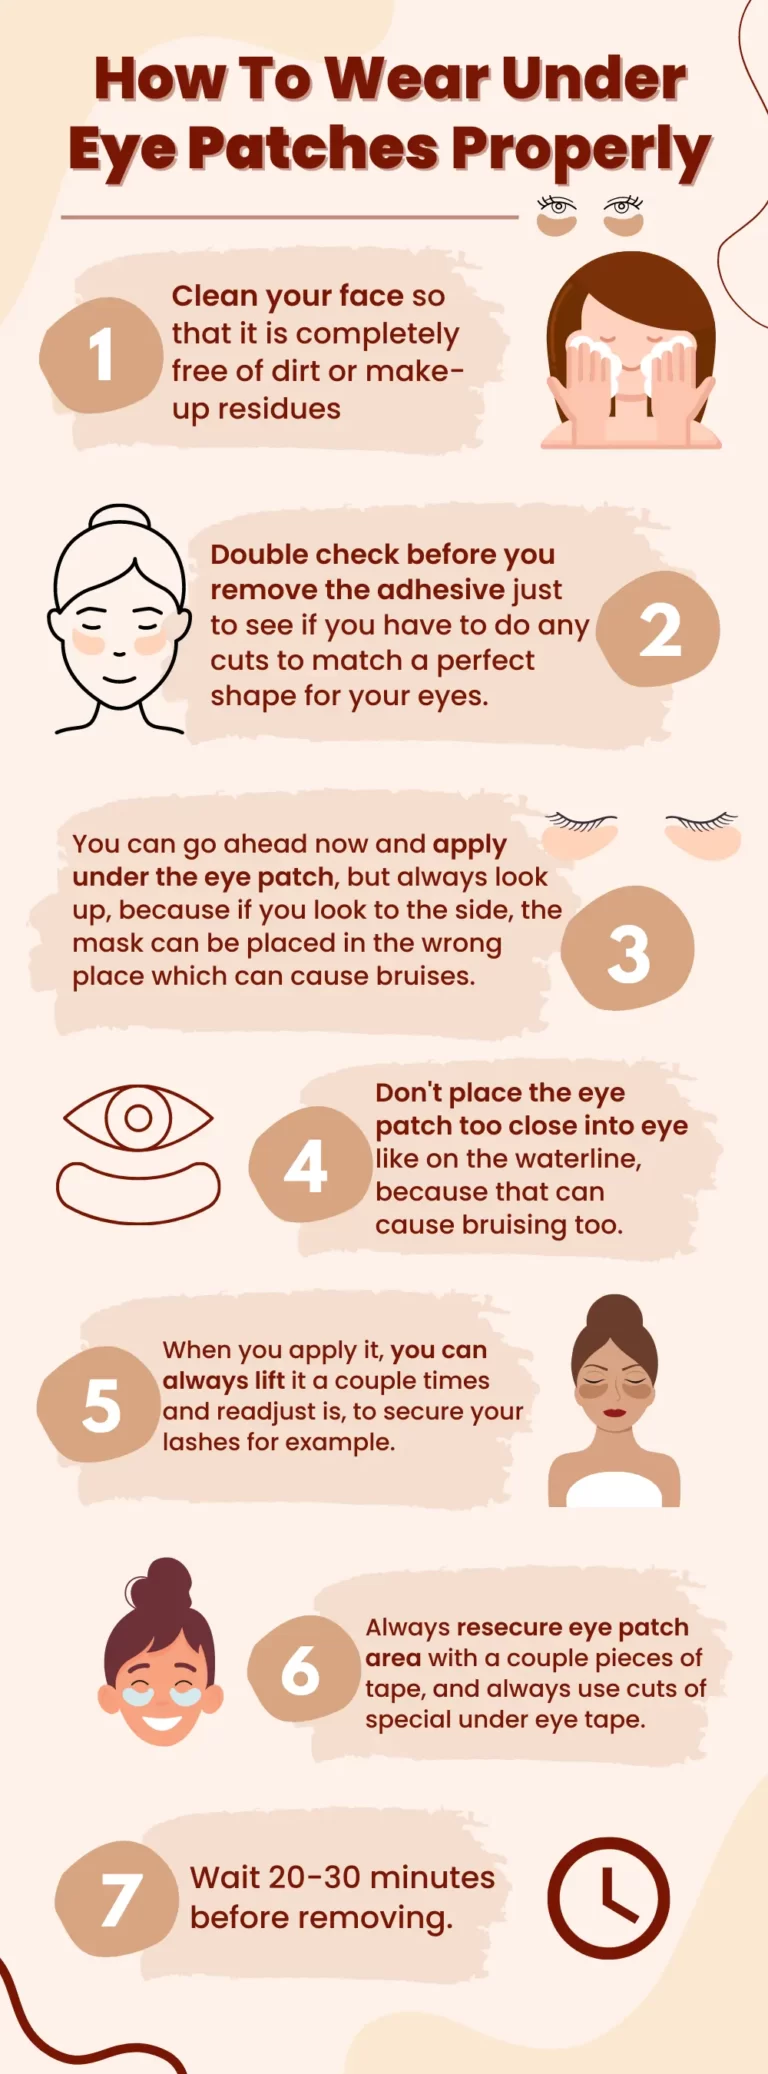 How To Wear Under Eye Patches Properly